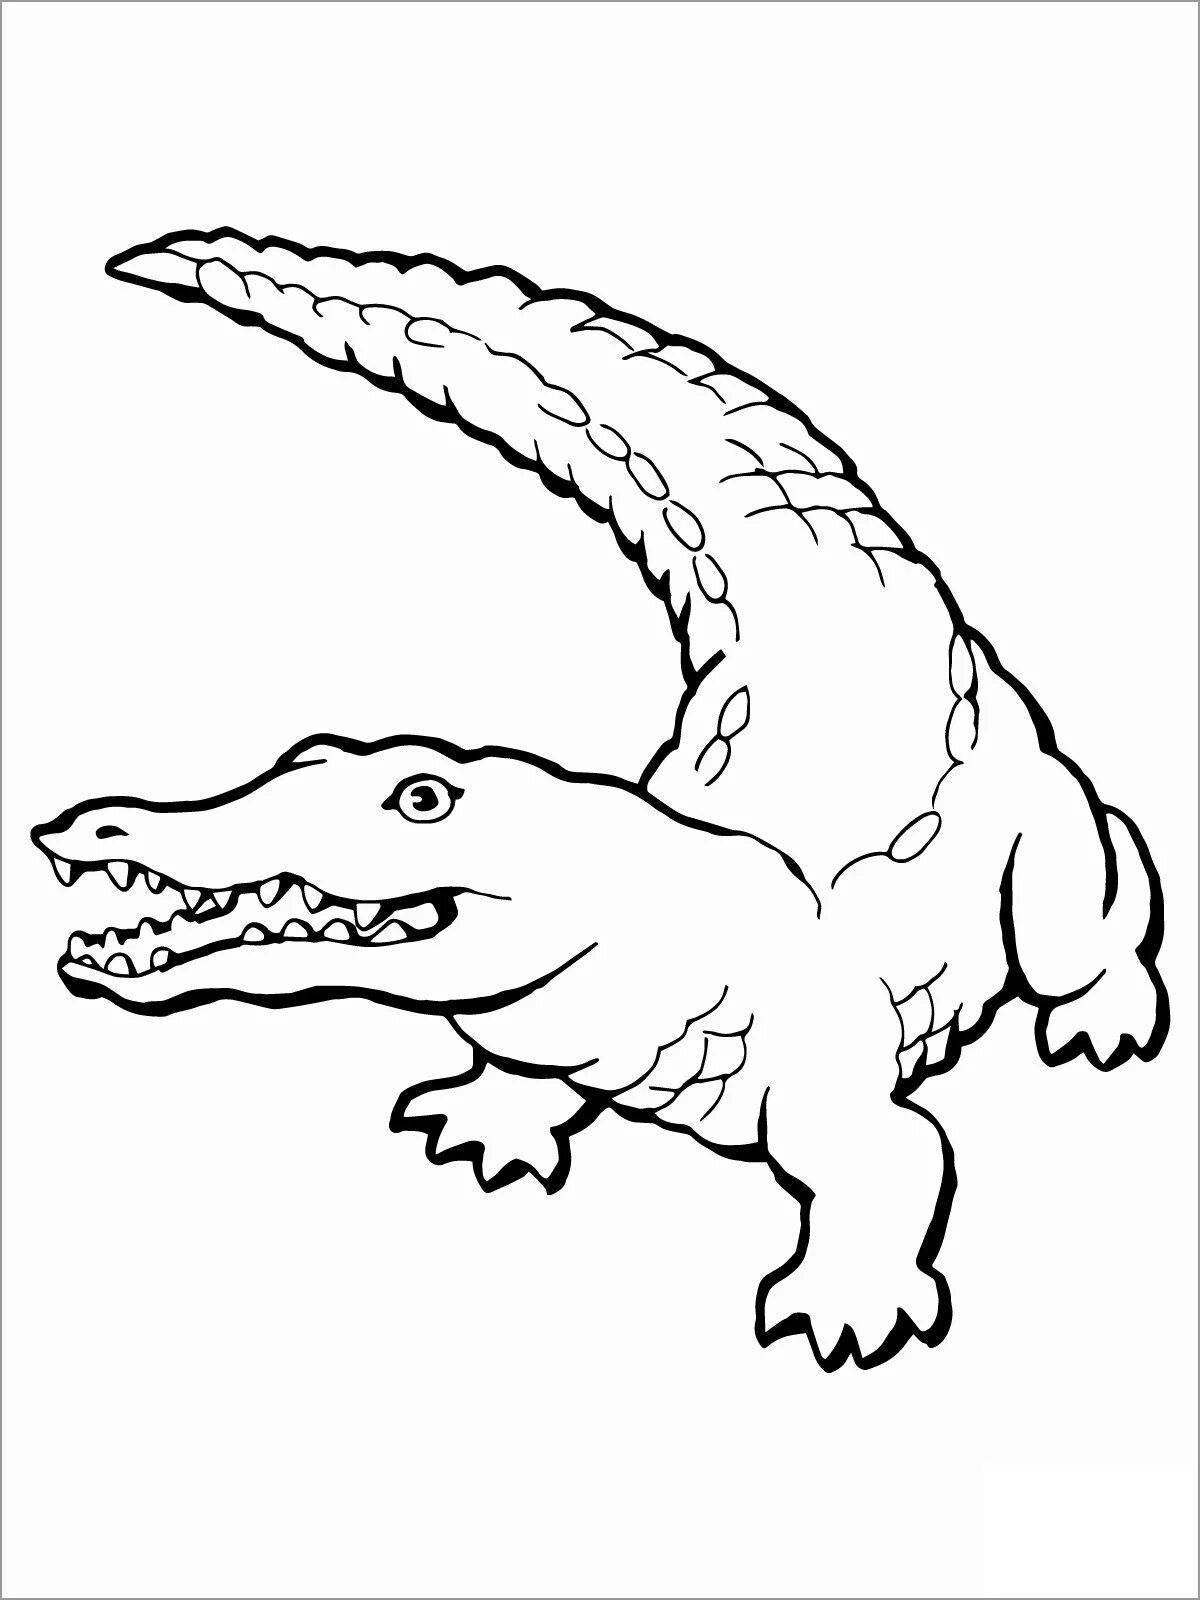 Exotic alligator coloring page